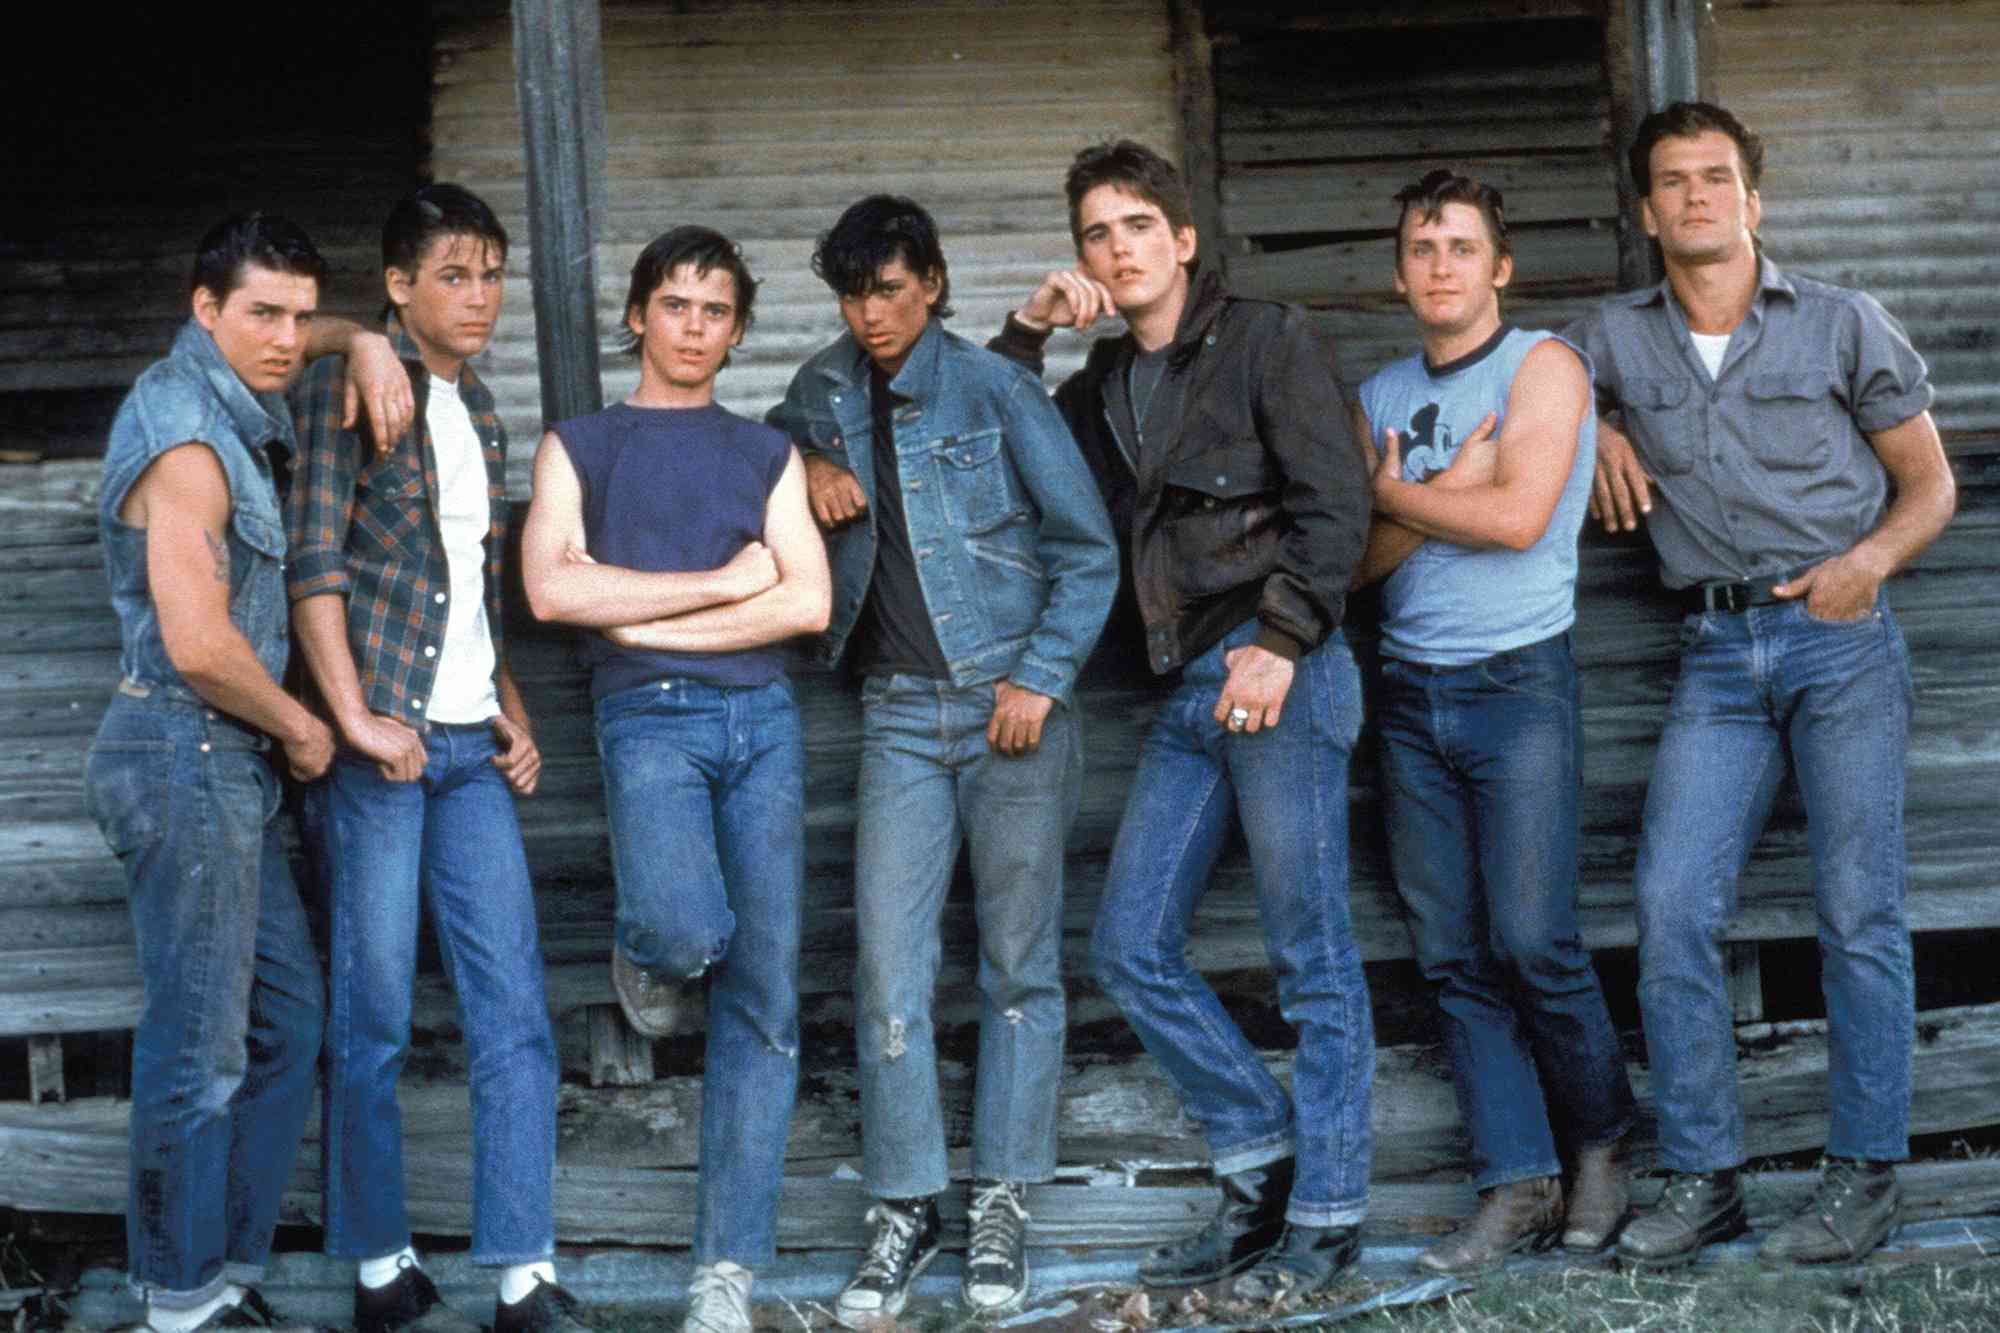 “The Outsiders” Cast: Where Are They Now?